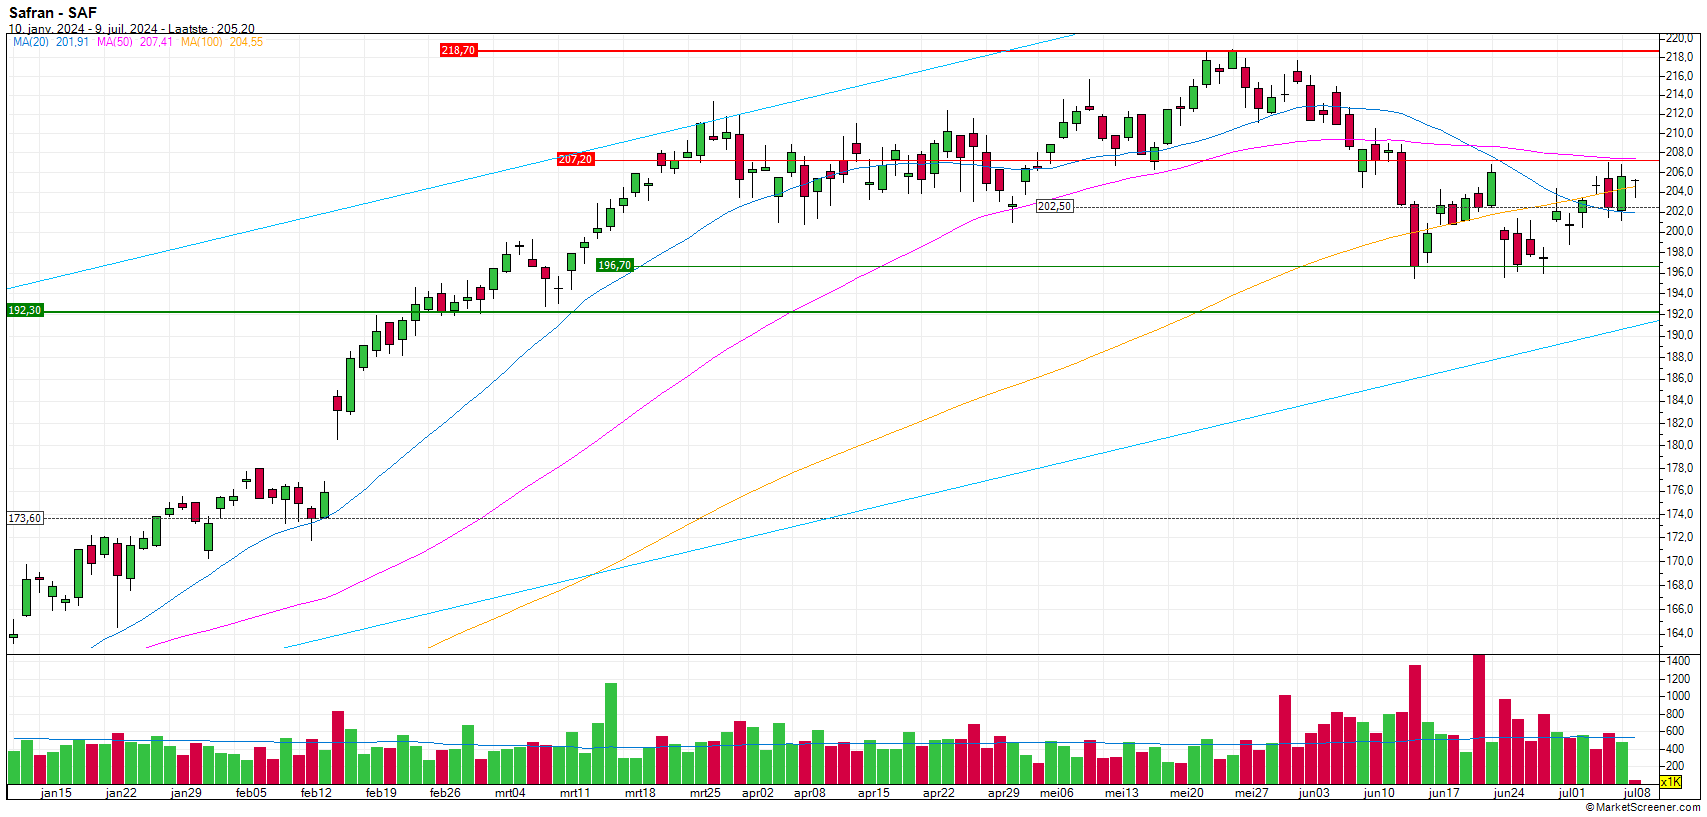 https://www.zonebourse.com/zbcache/charts/ObjectChart.aspx?Name=4696&Type=Custom&Intraday=1&Width=1707&Height=817&Cycle=DAY1&Duration=6&ShowCopyright=2&Company=Skin:Alex_nl&ShowName=1&ShowDate=1&Show&Render=Candle&NoRedirect=1